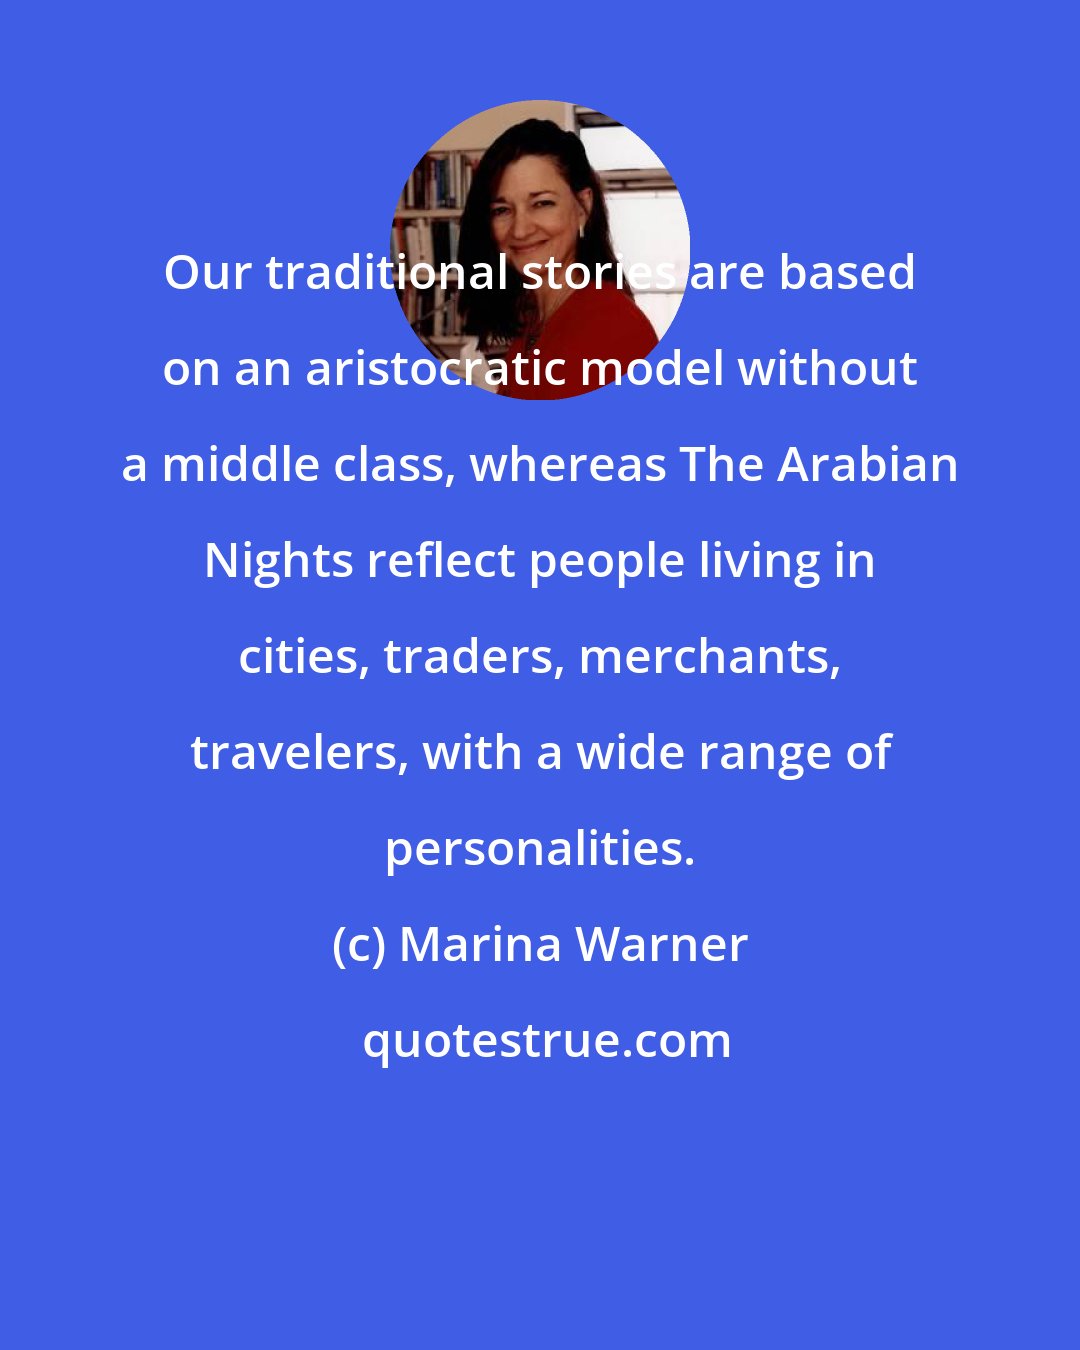 Marina Warner: Our traditional stories are based on an aristocratic model without a middle class, whereas The Arabian Nights reflect people living in cities, traders, merchants, travelers, with a wide range of personalities.